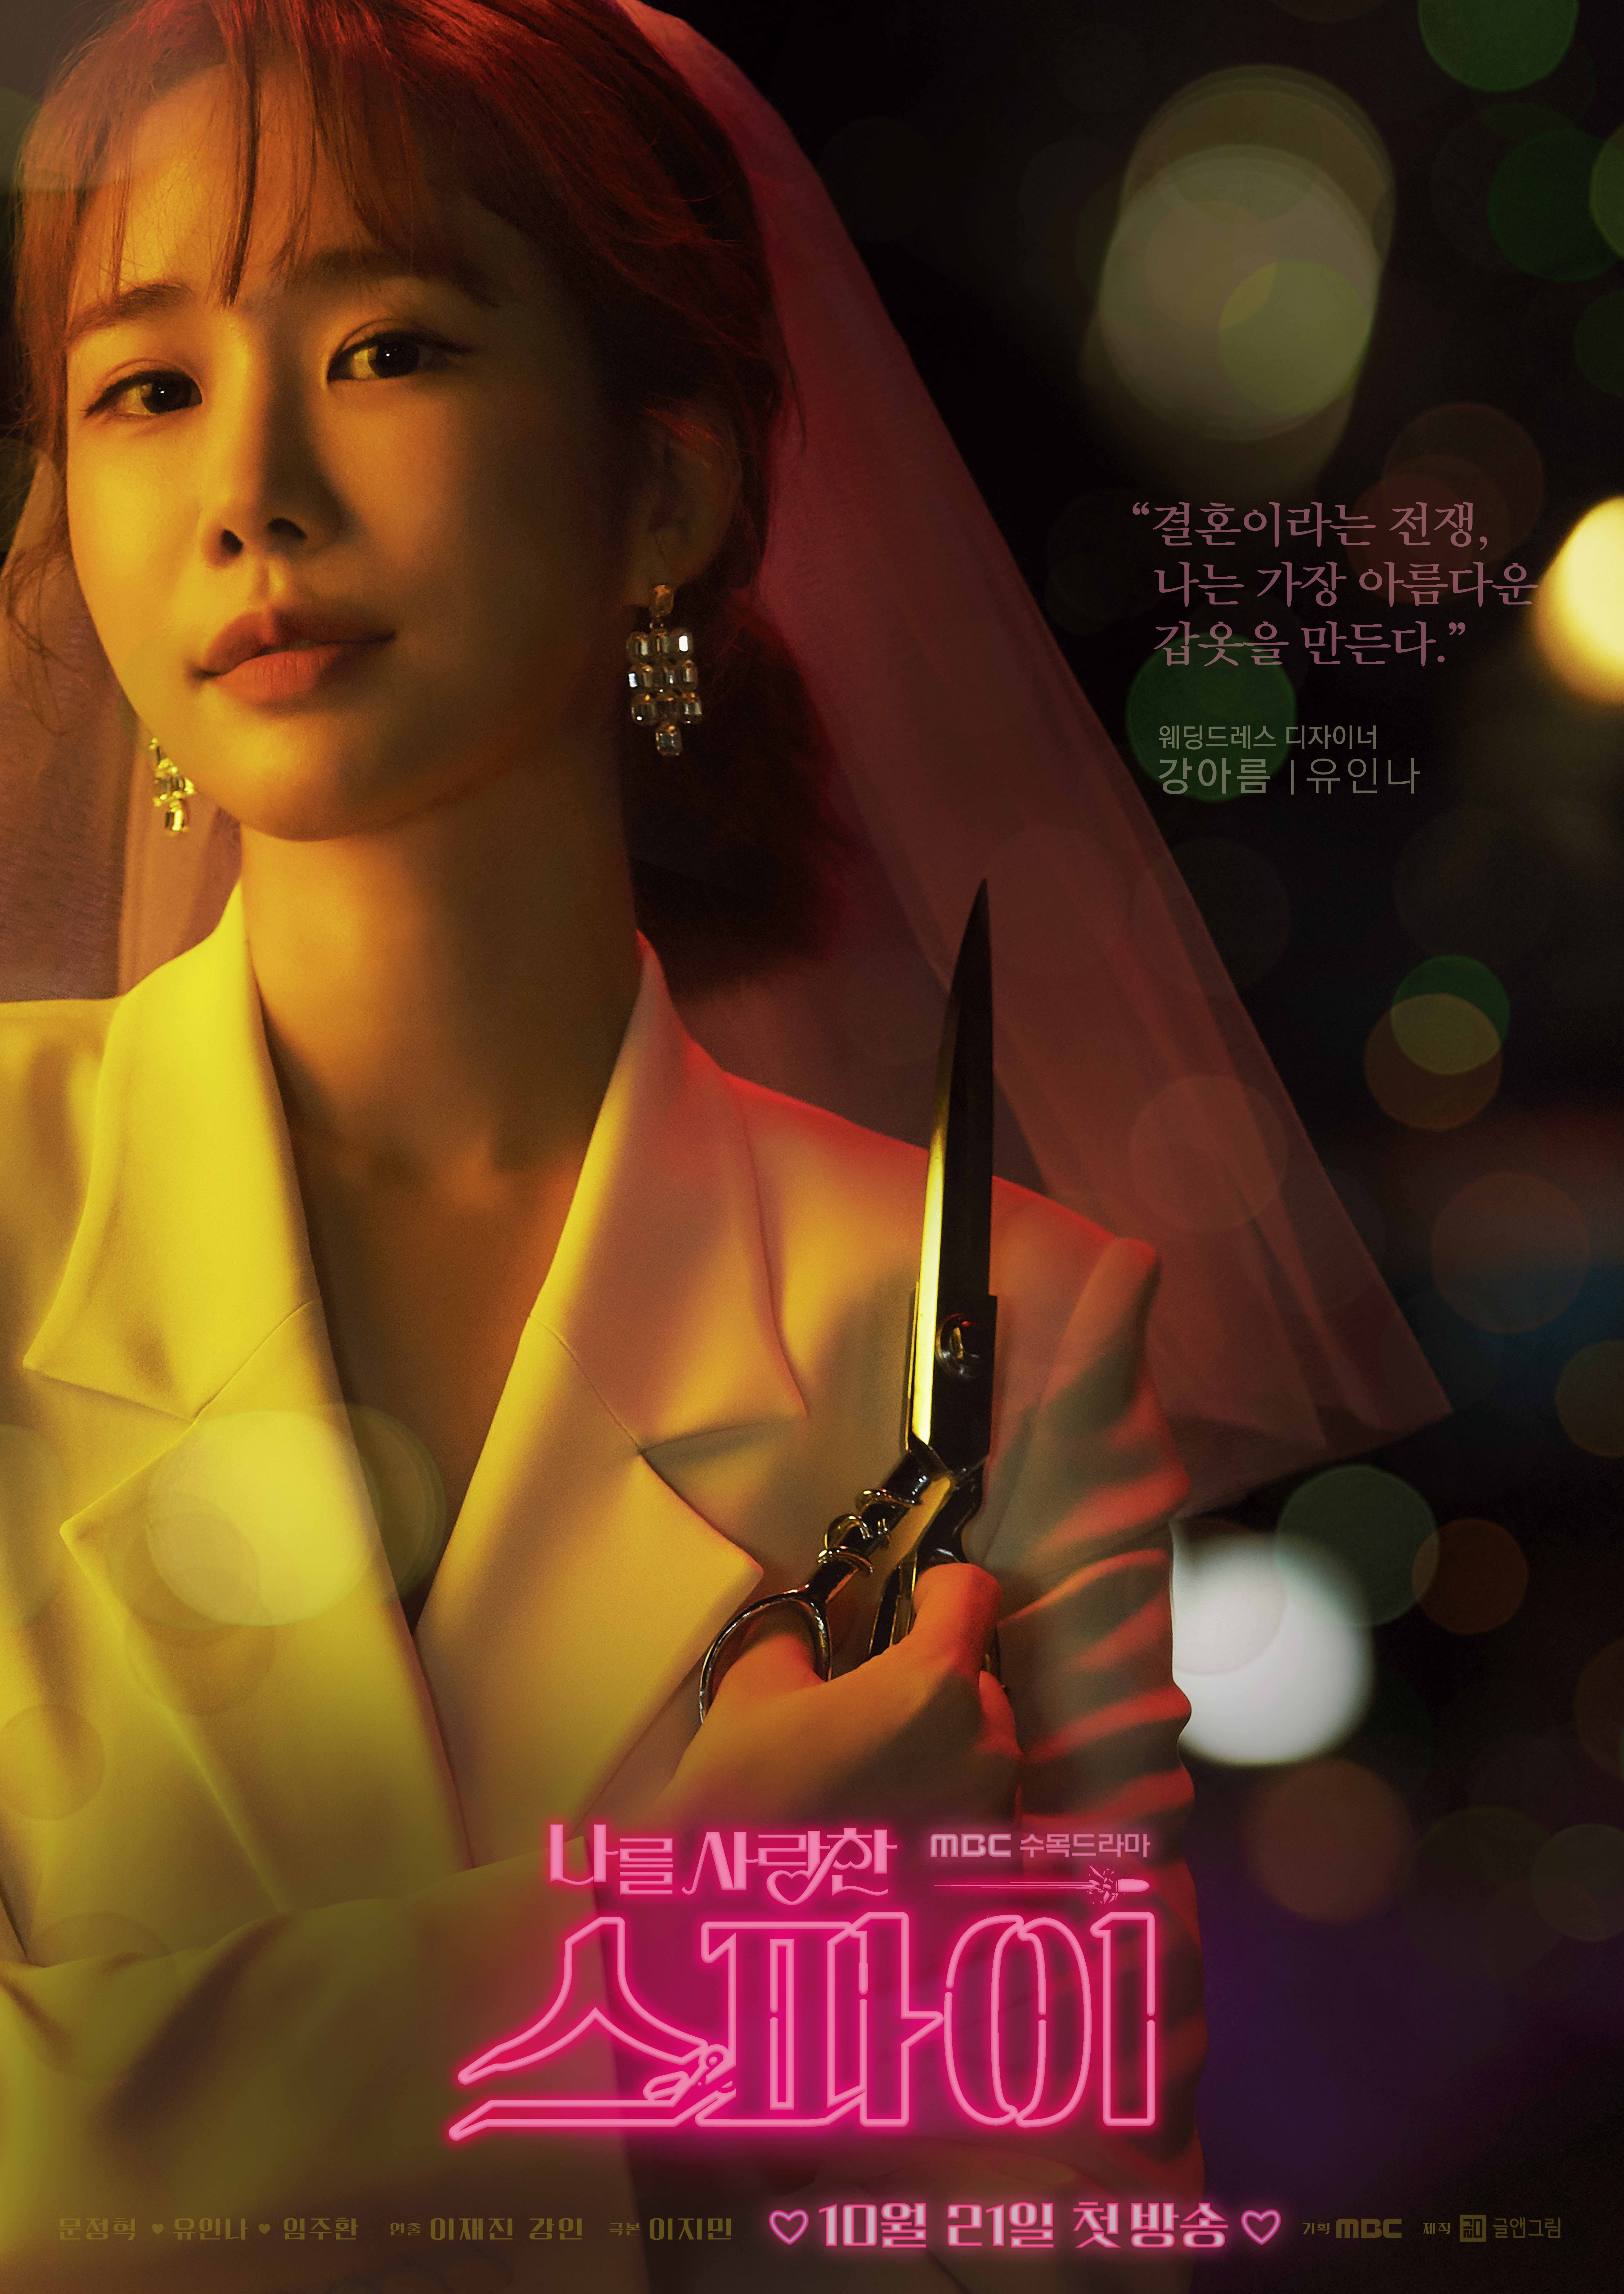 Spy who loved me Moon Jung Hyuk, Yoo In-na, and Lim Ju-hwan return with sweet charm.On October 21, MBCs new tree mini series Spy, which is broadcasted first, (directed by Lee Jai-jin, Lee Jai-jin, and production and picture), released Moon Jung-hyuk, Yoo In-na, and Lim Ju-hwans Character Poster, which overwhelm the attention with a different charisma.Spy, who loved me, draws a thrilling secret romantic comedy of two secret husbands and a woman caught up in spy warfare.The wonderful intelligence of three men and women who can never be together gives a pleasant smile and a thrilling excitement.Director Lee Jai-jin, who showed sensual production through The Banker and My Daughters Golden Month, will hold the megaphone and the script will be directed by Lee Jai-jin.In particular, attention is focused on Lee Jai-jins first drama, which produced big hits such as the films Namsans Heads, Astronomy: Asking in the Sky, and Miljeong.Above all, the chemistry of Moon Jung Hyuk, Yoo In-na, and Lim Ju-hwan, who shine more as they take off their veils, ignite expectations.The Character Poster, which was released on the day, also catches the eye intensely.First, Moon Jung-hyuks harsh charisma, who plays the role of Jeon Ji-hoon, an Interpol secret agent disguised as a travel writer, stimulates excitement.The ex-husband of Yoo In-na, he is the owner of the former World Free Pass charm, which is full of smiles and charisma as well as intense beauty that does not know where to go.I am divorced because I love the river beautiful and hot, but I am reunited with an unexpected event. I said to my deep and deep gaze toward the river beautifully, There was no coincidence between us.One thing, he added to the story of two people who were caught up in the spy war together.The elegant charisma of Yoo In-na, who has a relaxed smile with confident eyes, also attracts attention. Yoo In-na turns out that Spy is a constitution (?), a wedding dress designer, Gangbeam, will make a different transformation.Kang, who thought sewing was a vocation, is expected to play a role in the reversal of intelligence with two husbands with a secret secret of secret police and industry Spy.Here, the phrase The war of marriage, I make the most beautiful armor is interesting and makes him more excited.Lim Ju-hwan, a diplomat-studded industrialist named Spiy Derek, overwhelms the atmosphere with his charisma of coolness and softness.Derek Hyun is a person who hides strong desire and coolness in a gentle smile. Love for Kang is sincere, but he can not reveal his identity as Jeon Ji-hoon did.The phrase Im good at pretending Im cheated, so dont lie, added to my calmly smelted look as if I were trying to keep my feelings out of sight, stimulates curiosity.It is noteworthy how Derek Hyun will face the appearance of Jeon Ji-hoon, who shakes his world completely built.The unspecific material, the unpredictable secret romance created by Characters new combination, unfolds pleasantly and dynamically, said the production team of Spy, who loved me.We will be able to confirm the true value of the Loco craftsmen Moon Jung-hyuk, Yoo In-na, and Lim Ju-hwan, he said. Please expect discriminatory romantic intelligence.On the other hand, Spy, who loved me, was produced by Misty, who was recognized for both workability and popularity, and Written and Picture, which created Romances separate book appendix.It will be broadcast first on MBC at 9:20 pm on October 21 (Wednesday).iMBC  Photos Provision = Writing and Picture